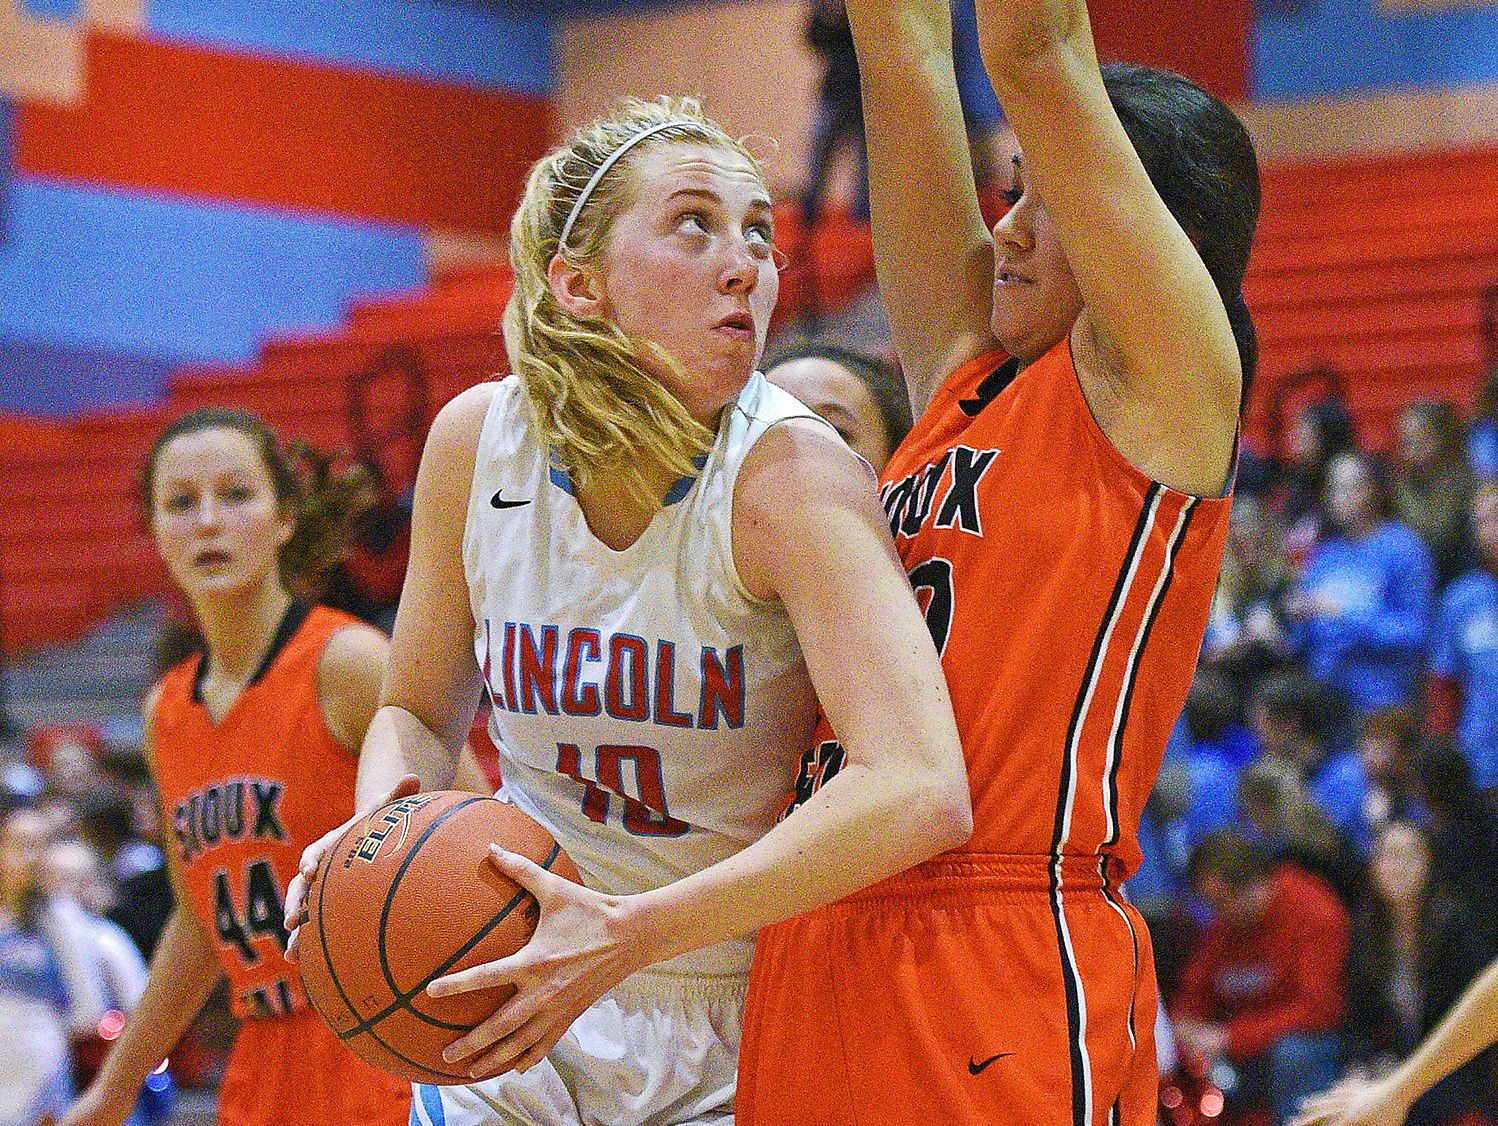 Lincoln's Anna Brecht (10) drives past Washington's Taylor VanderVelde (30) during a game Tuesday, Feb. 7, 2017, at Lincoln High School in Sioux Falls.